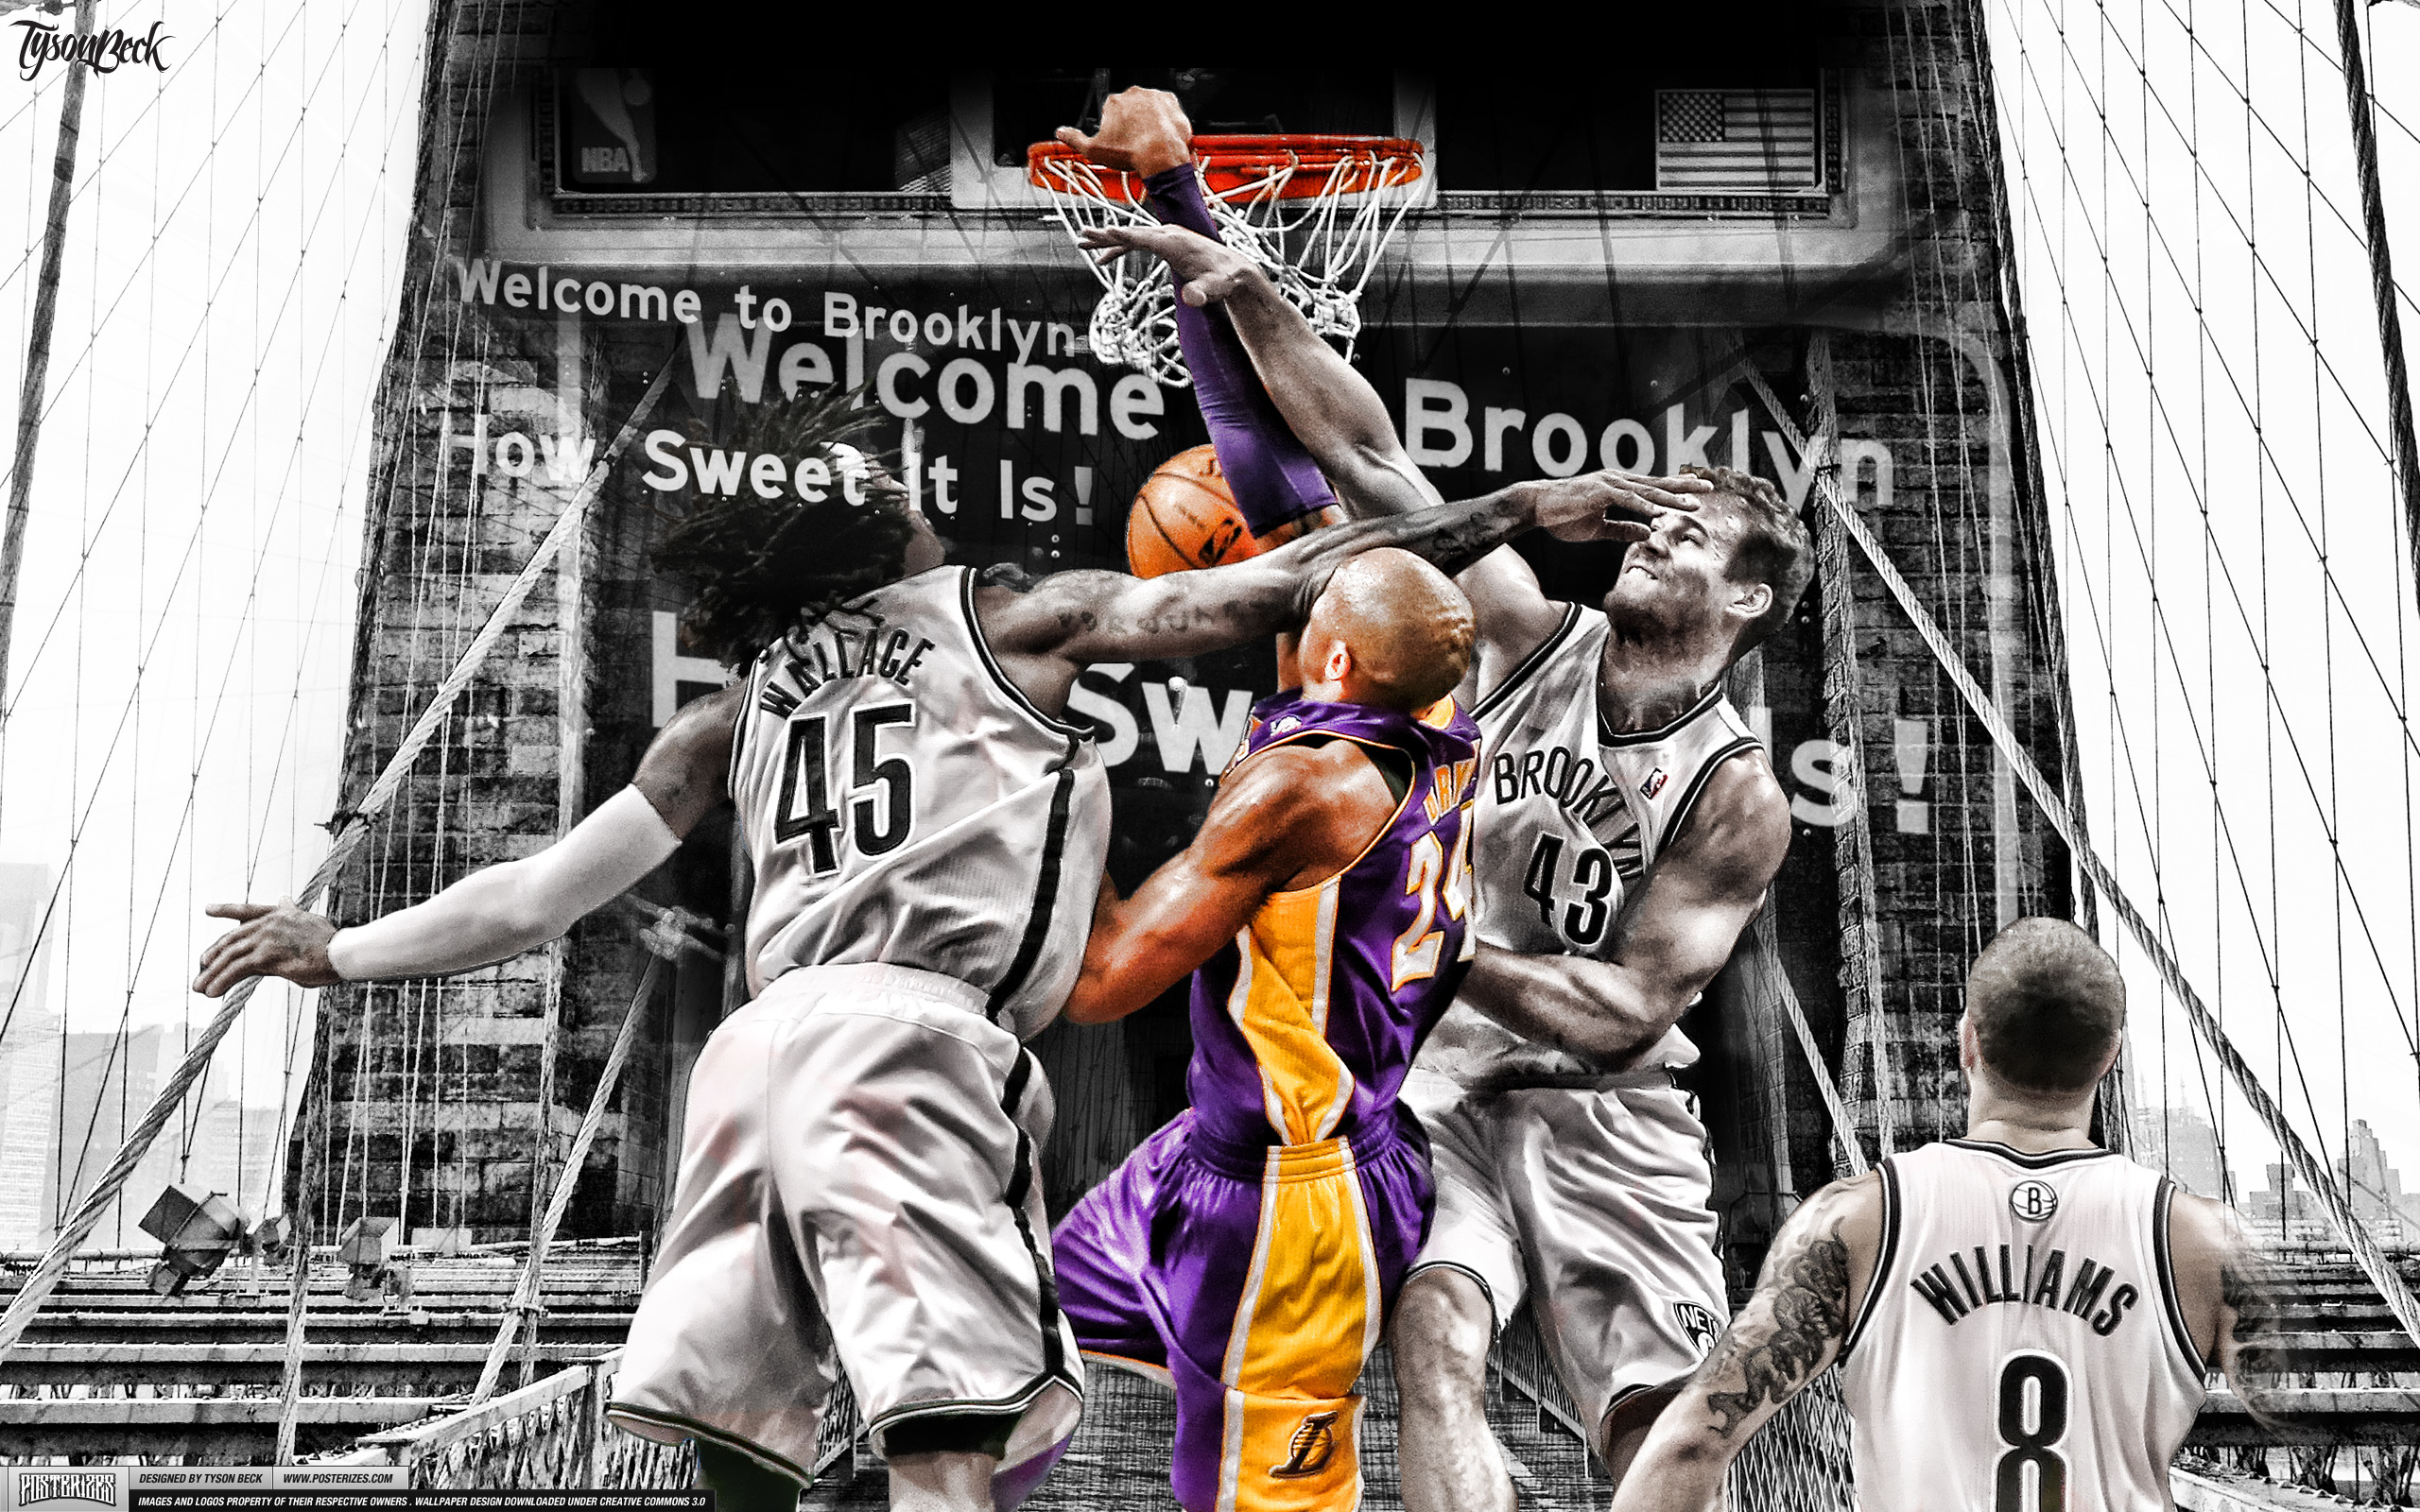 Find more Kobe Bryant dunks on Brooklyn Wallpaper Posterizes The Magazine. 